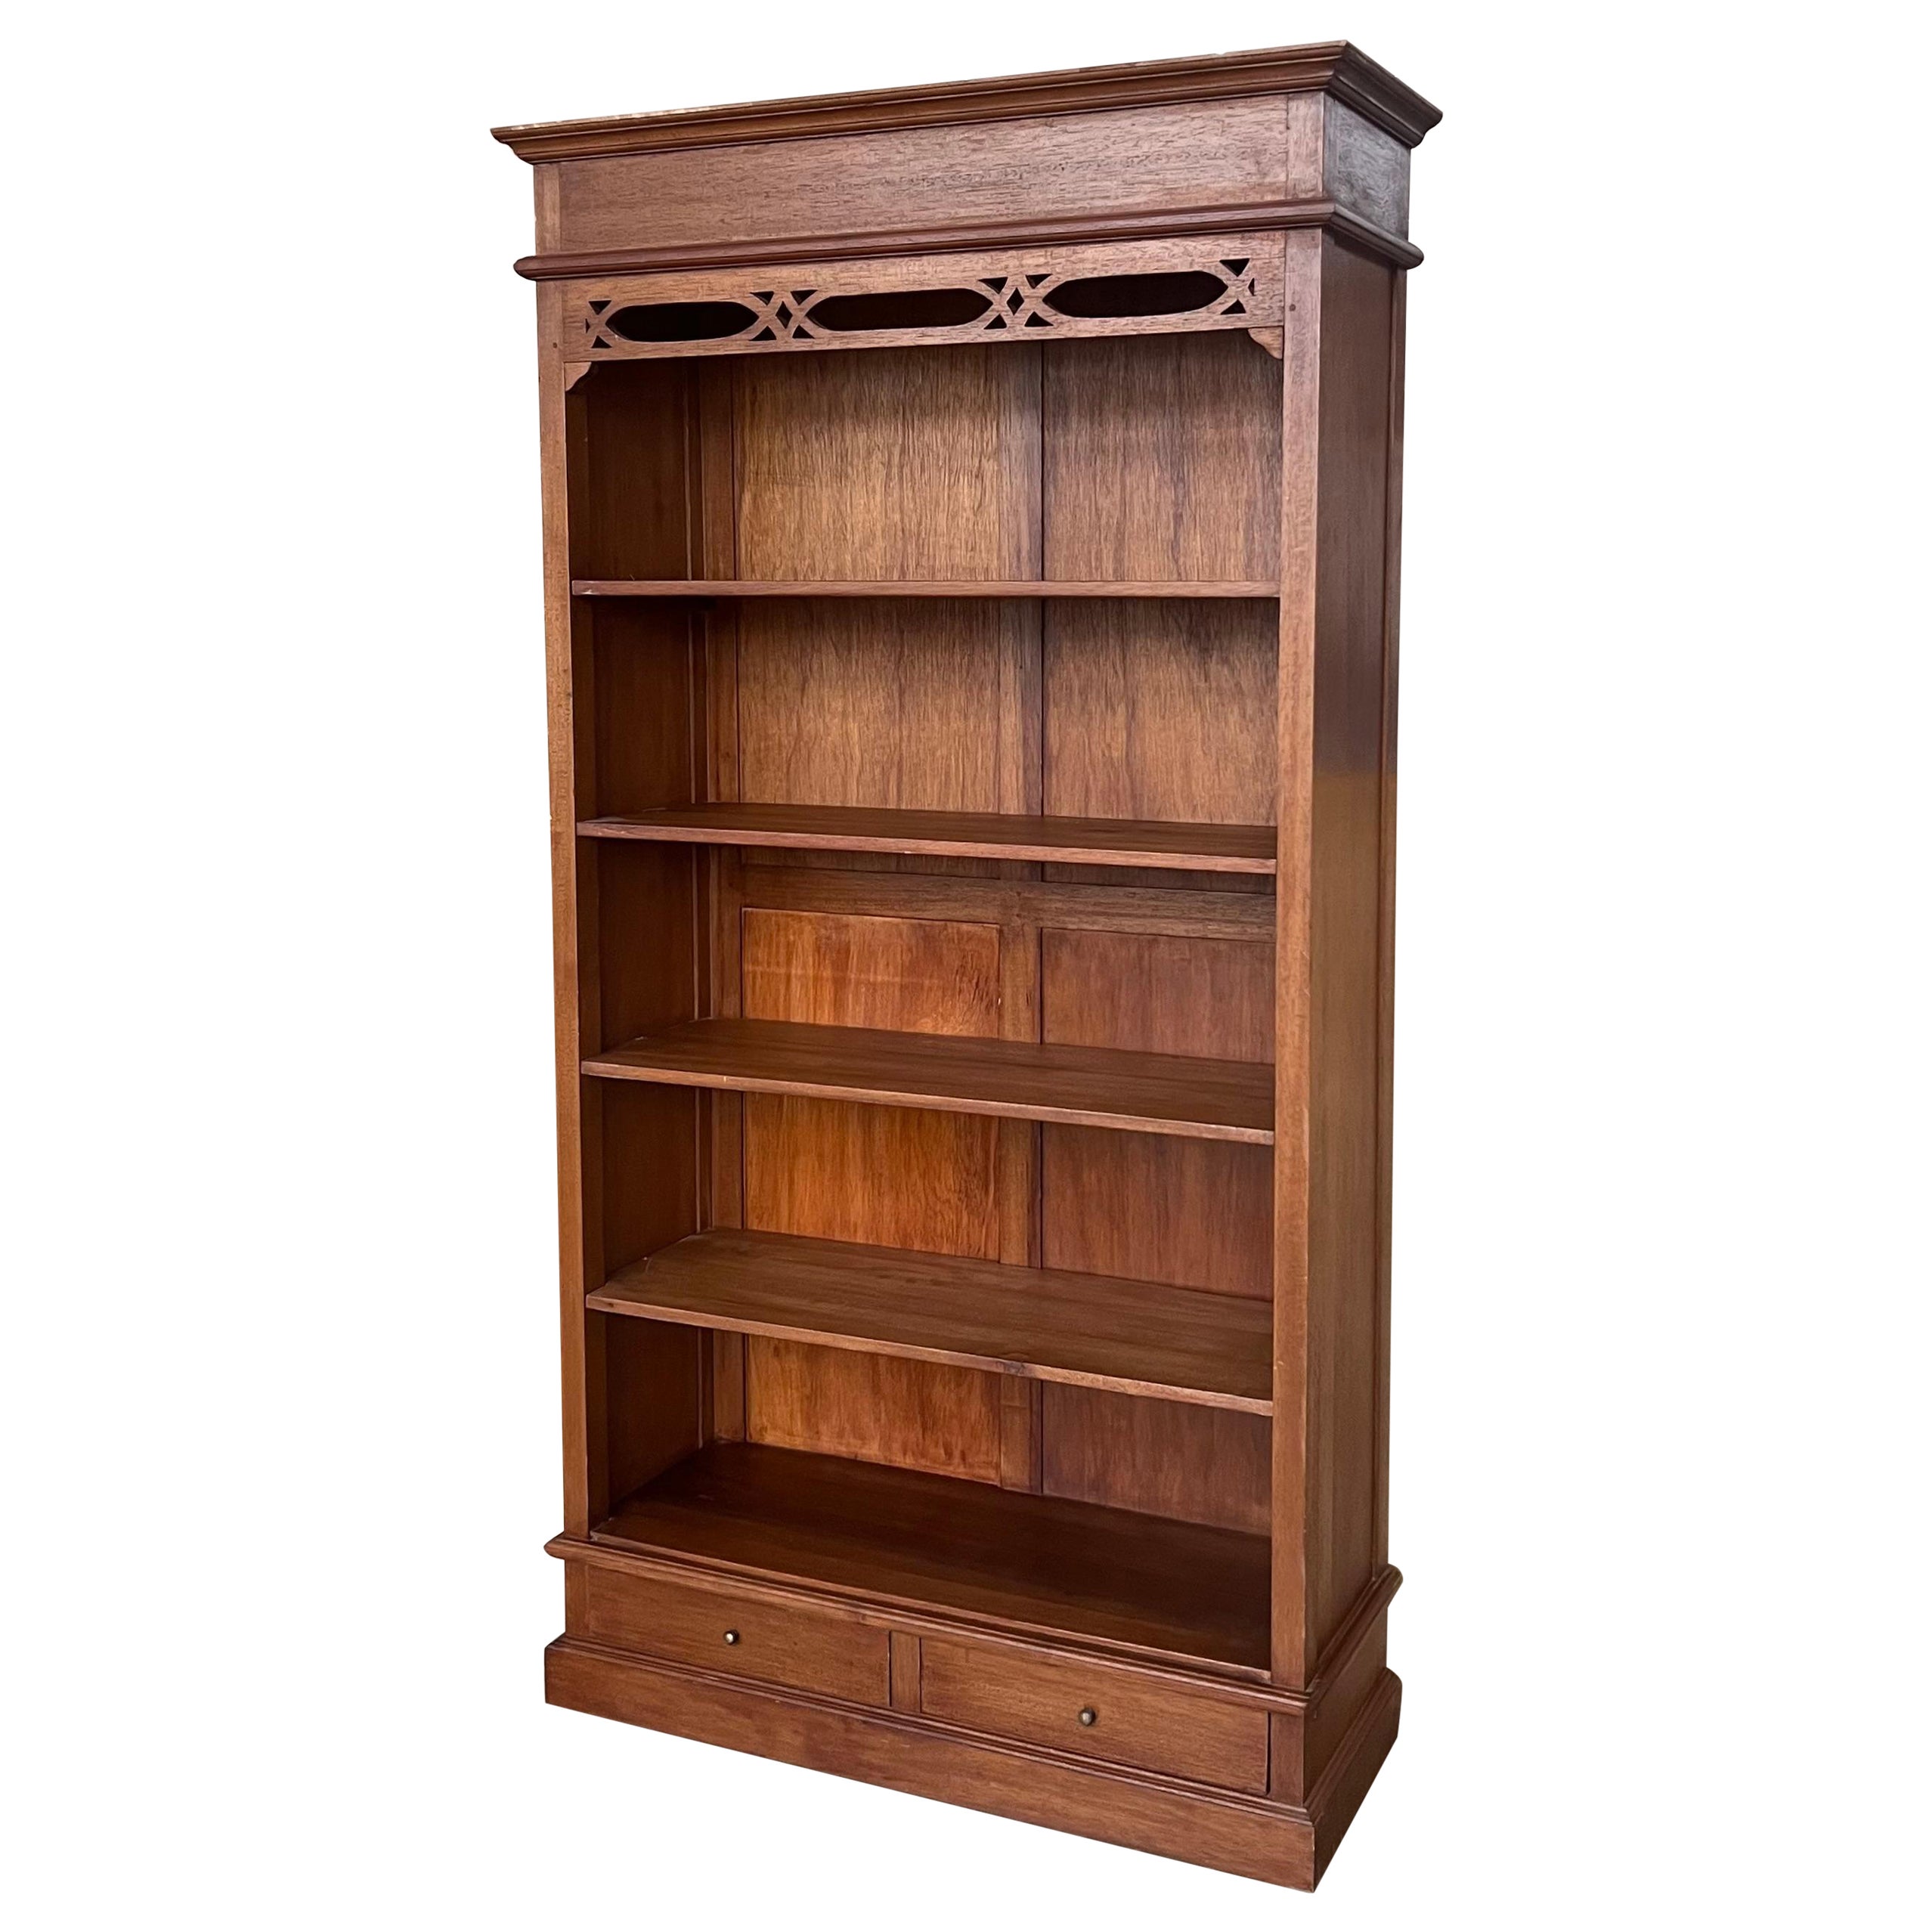 19th Solid Oak Bookcase or Etagere with Five Shelves For Sale